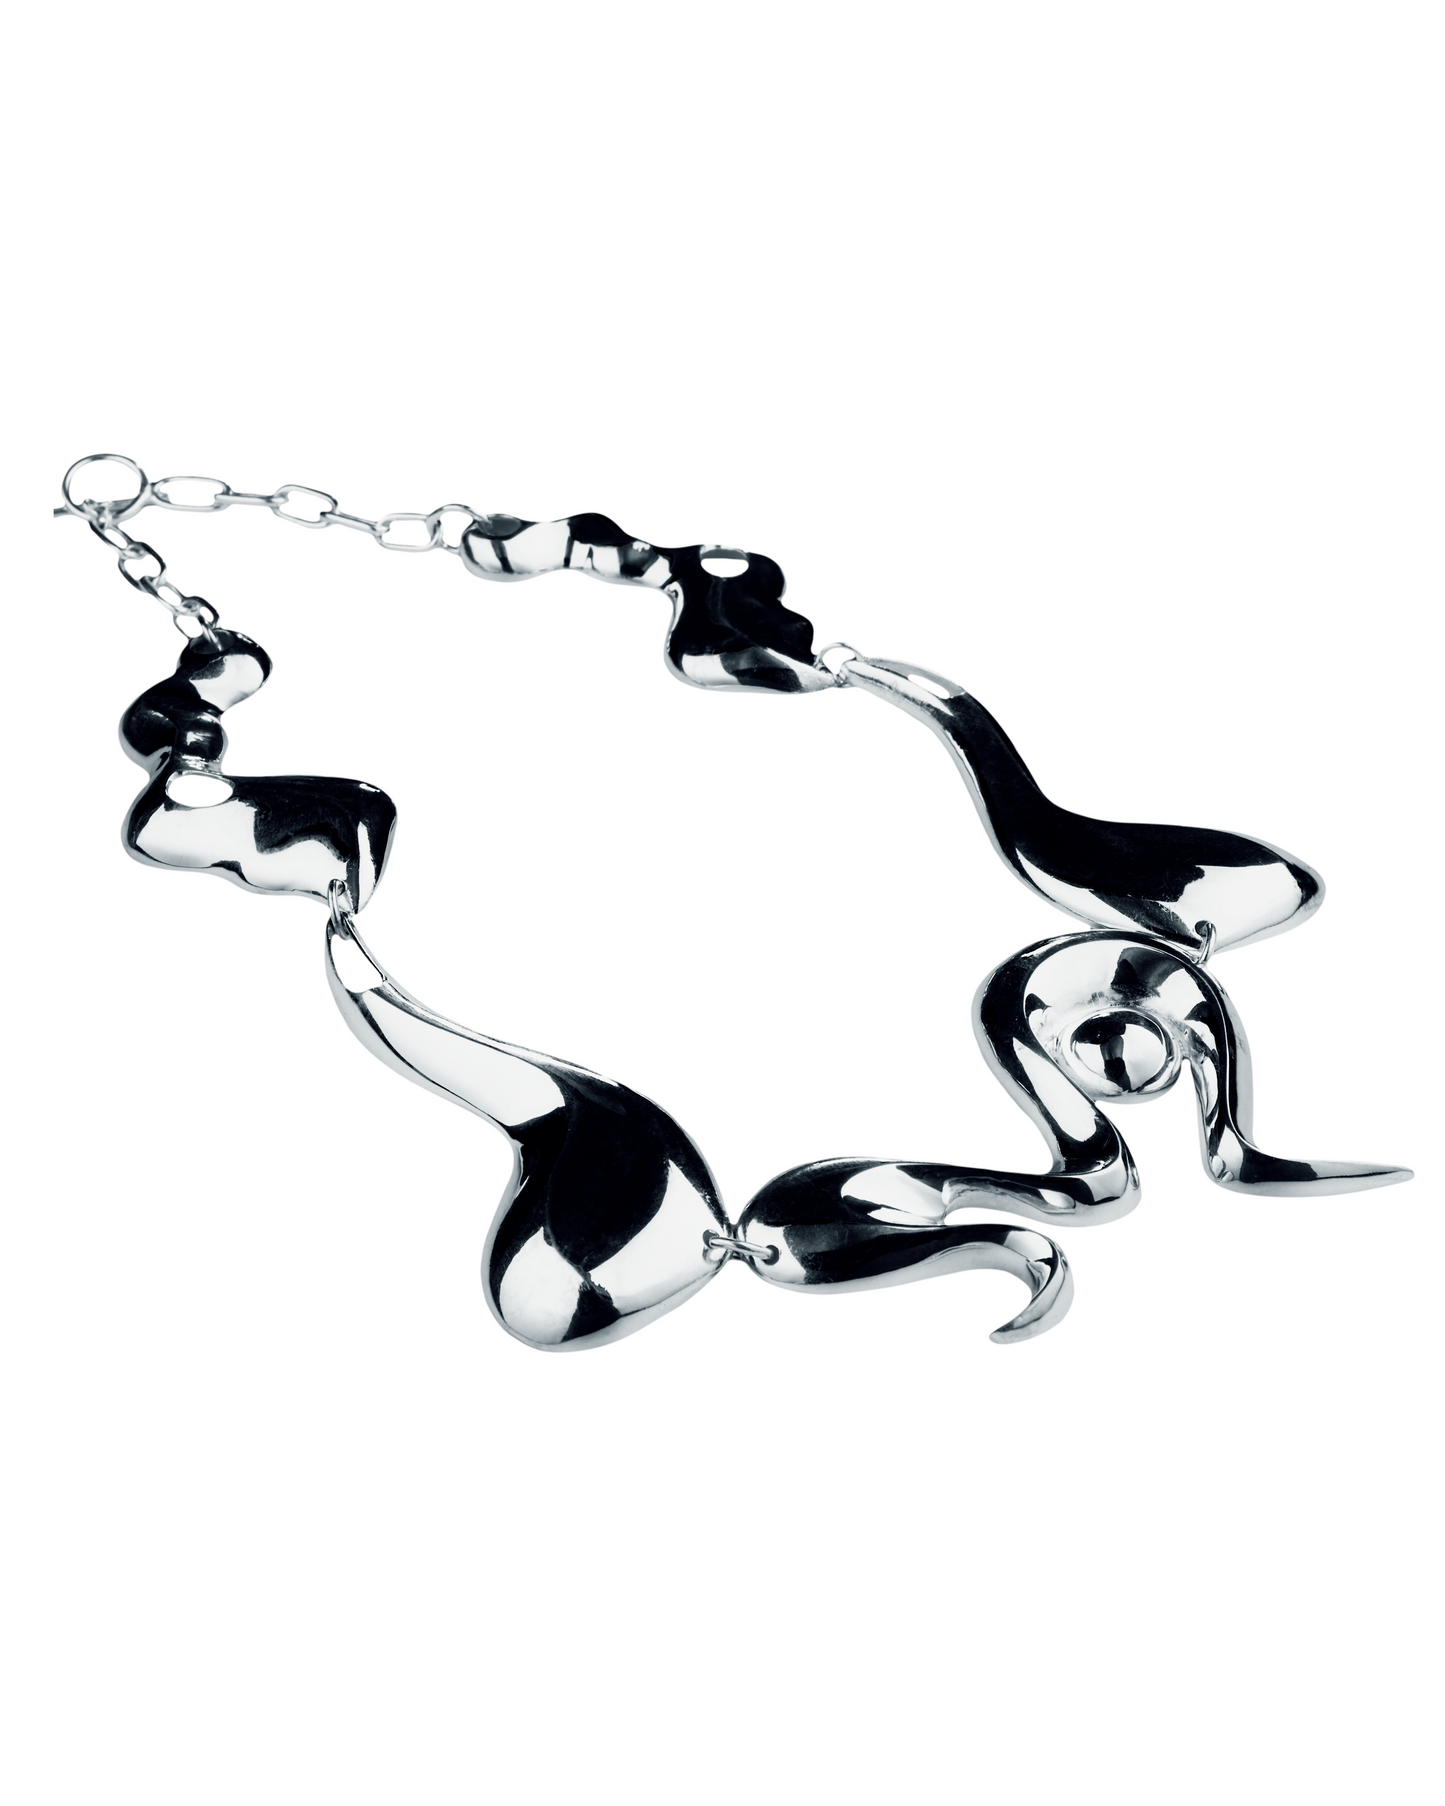 The Abstract Necklace - ISSHU